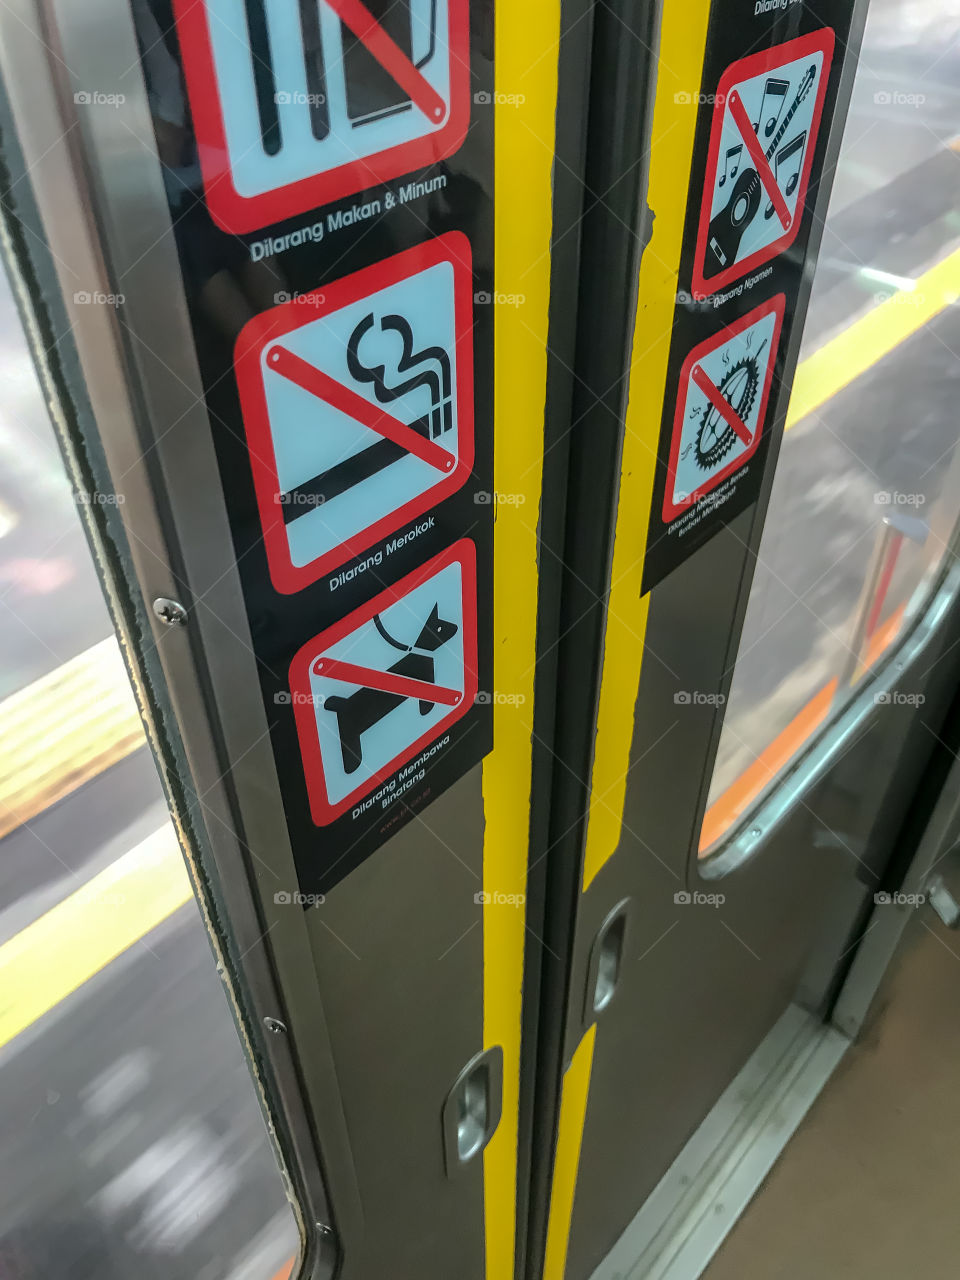 Warning signs on a train’s door